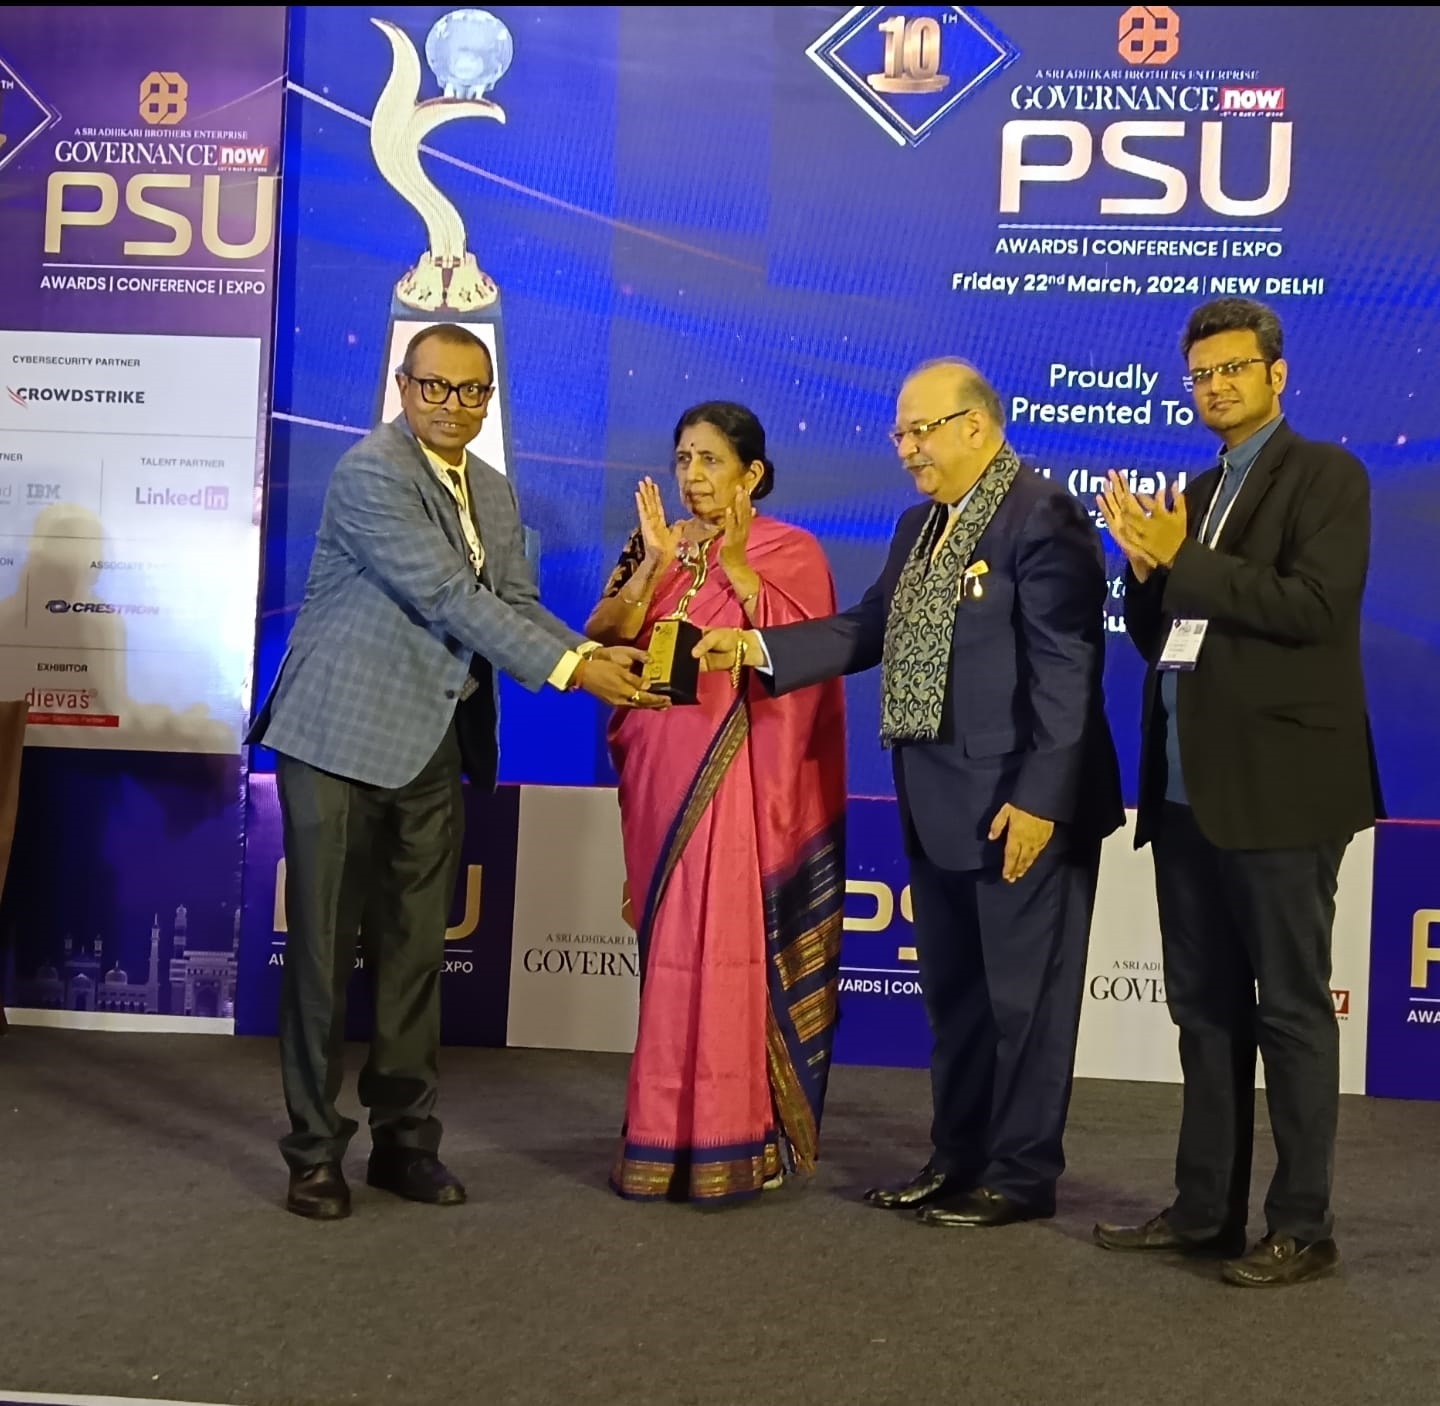 grse bags governance now psu awards in ‘communication outreach’ for five years in a row: also bags awards in nation building & reskilling of employees categories